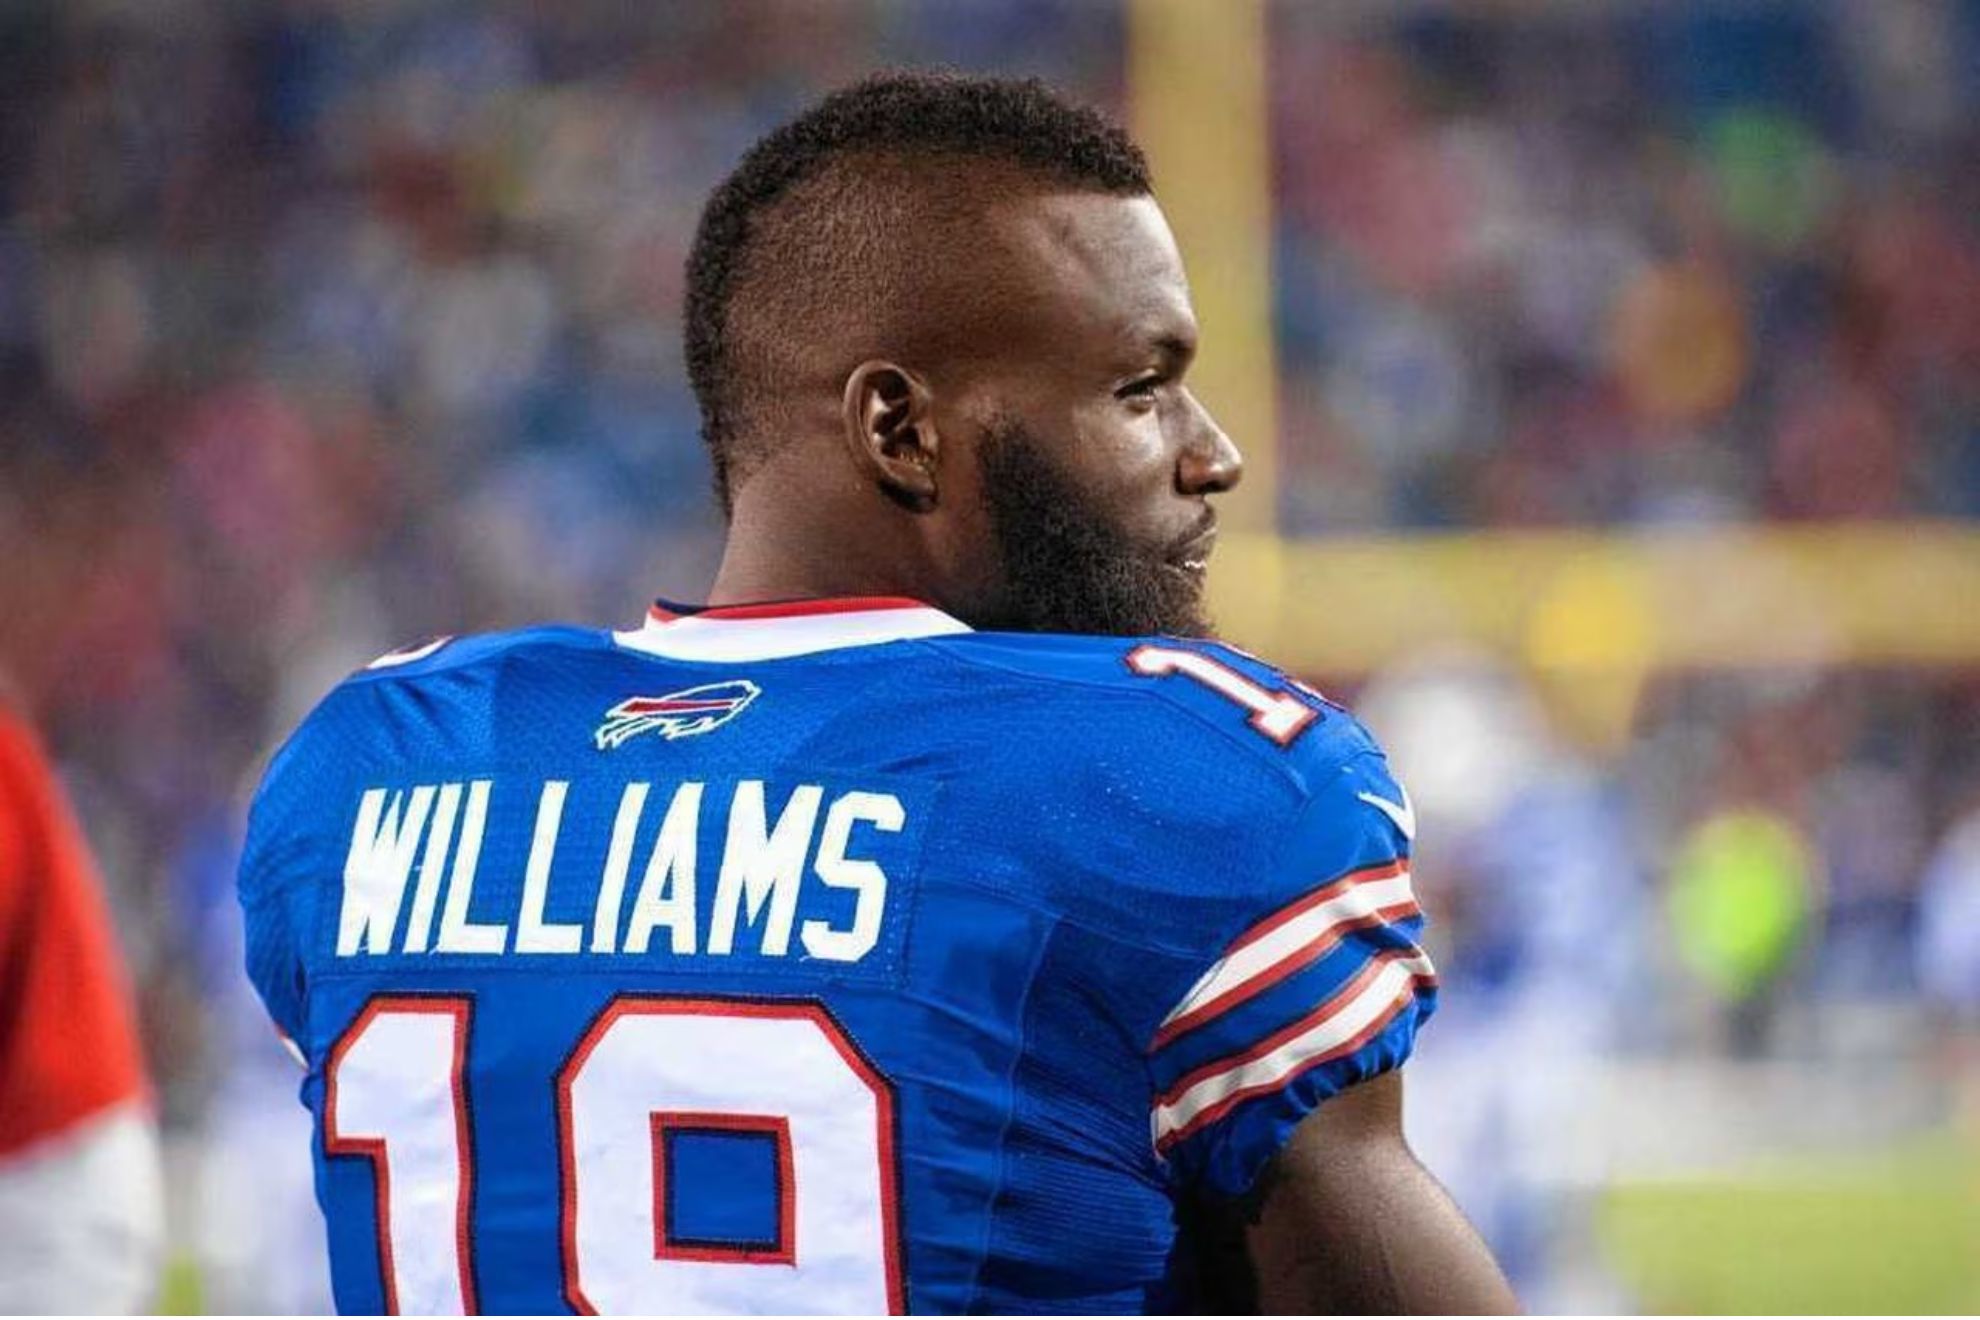 Reports of Mike Williams' tragic passing hit former NFL teammates and fans hard on Tuesday night.